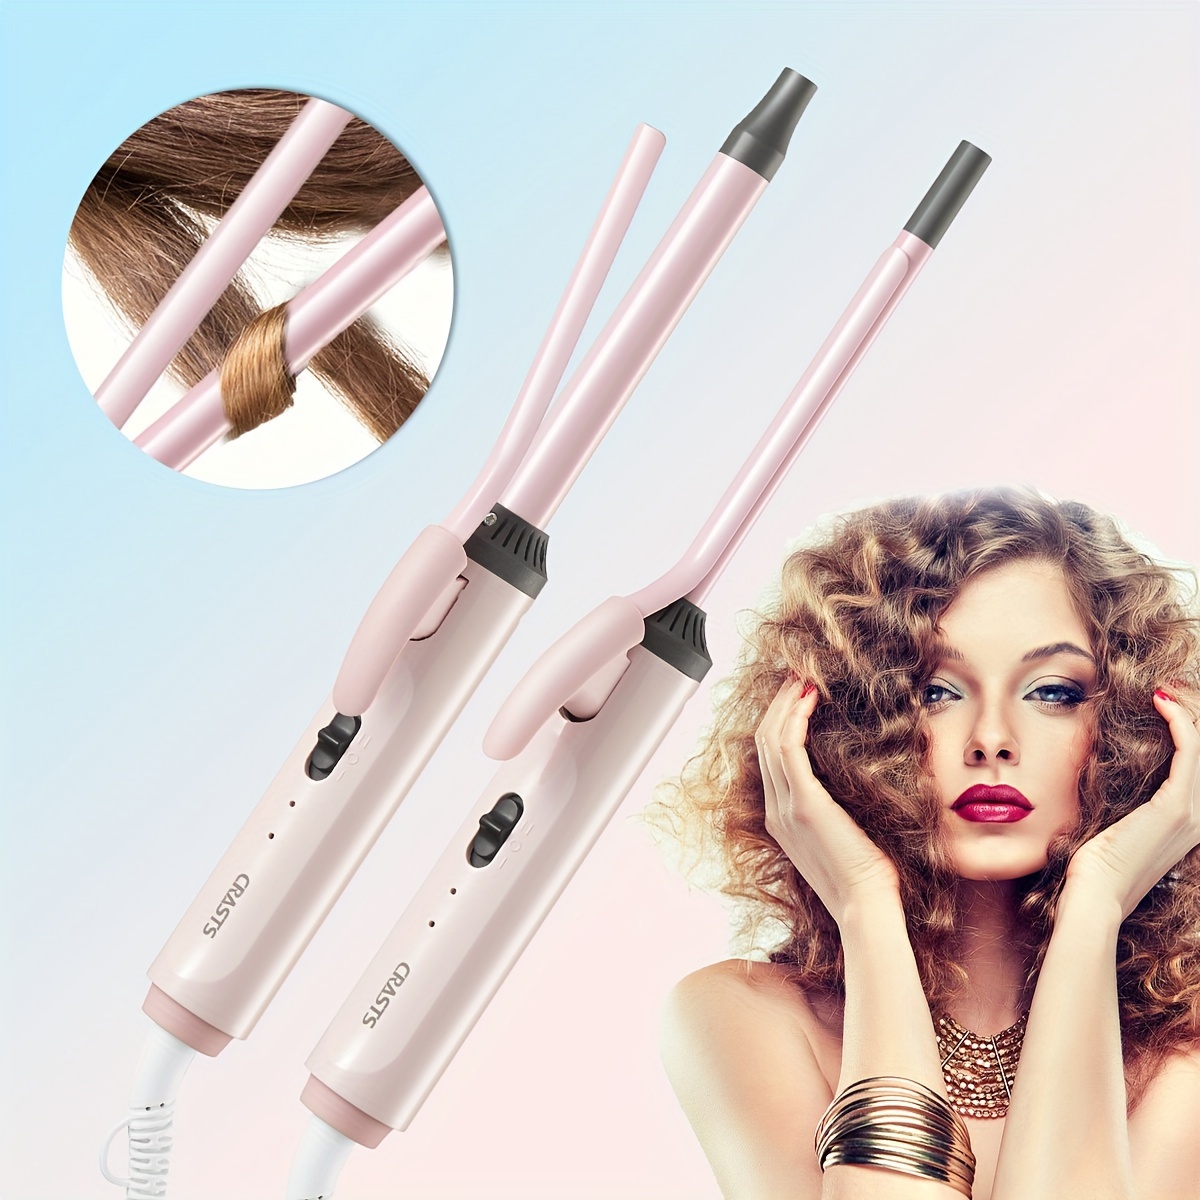 

Hair Curling Wand, Fine Root Thin Root Hair Curling Stick, Hairdressing Tool, Gifts For Women, Mother's Day Gift